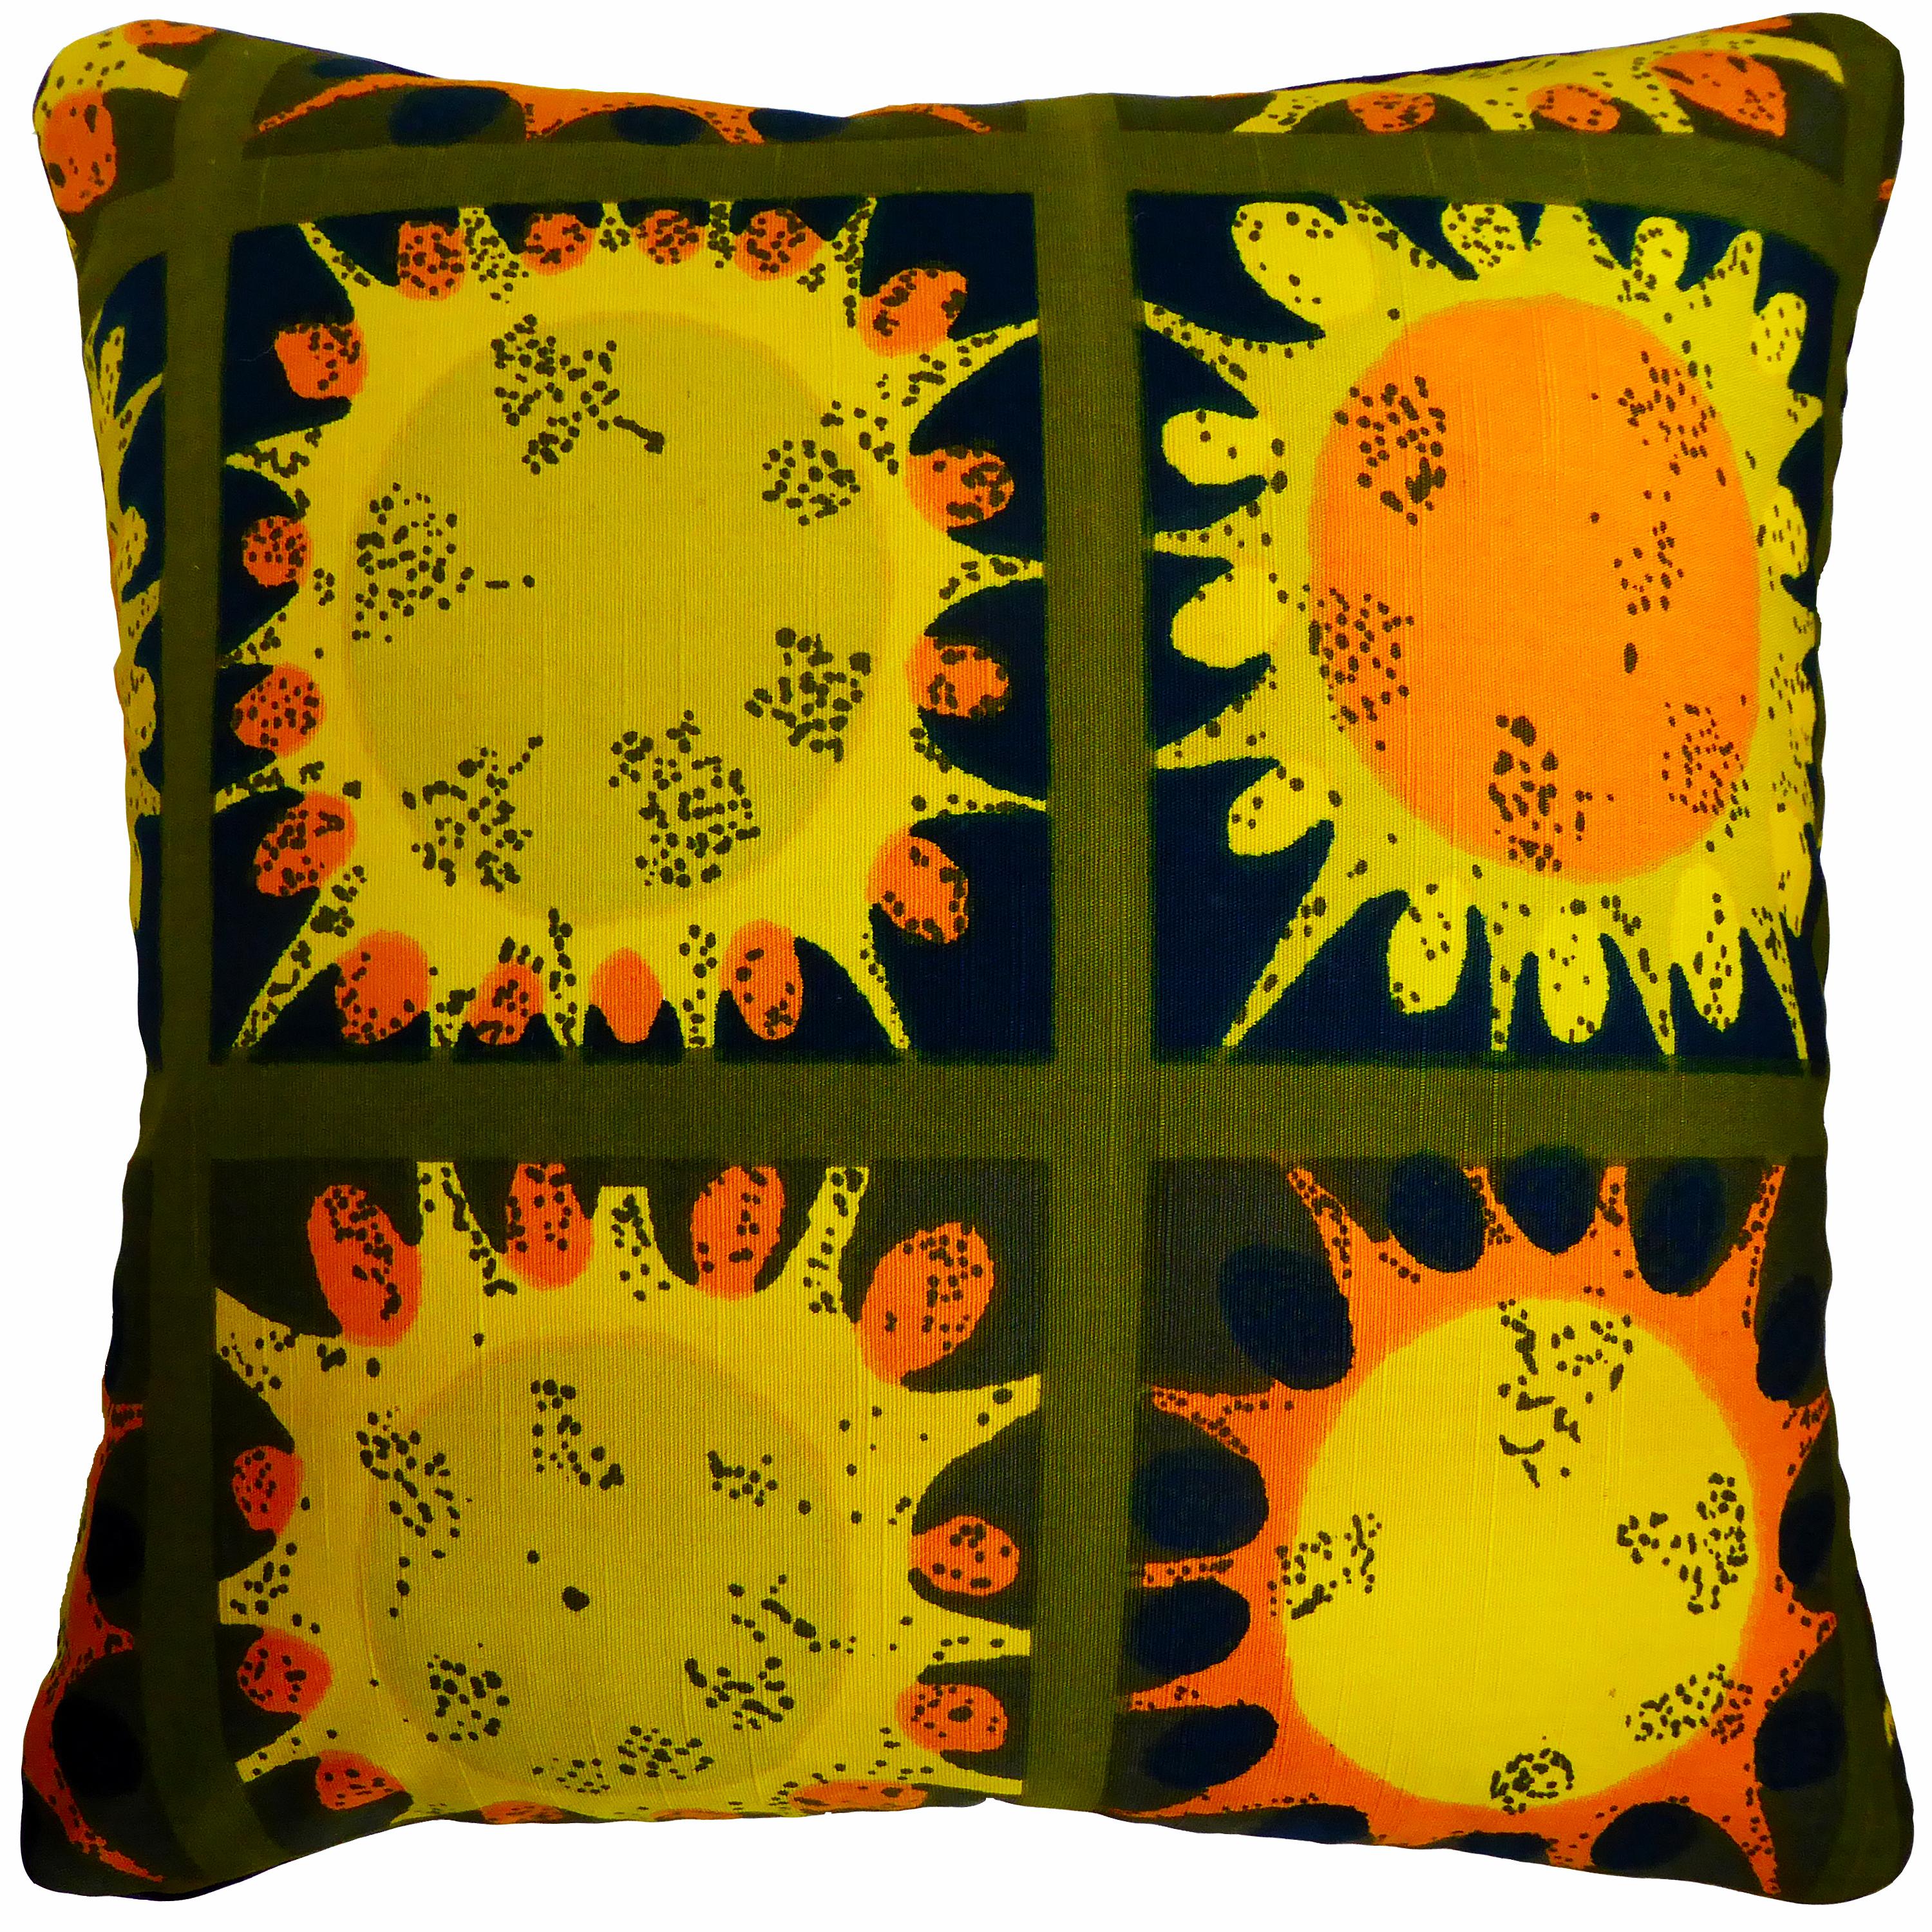 Paintball
circa - 1950
British bespoke-made luxury cushion created by using original vintage furnishing fabric in a retro style
Provenance; Britain
Made by Nichollette Yardley-Moore
Cotton bark-cloth furnishing fabric with full cotton lining
All